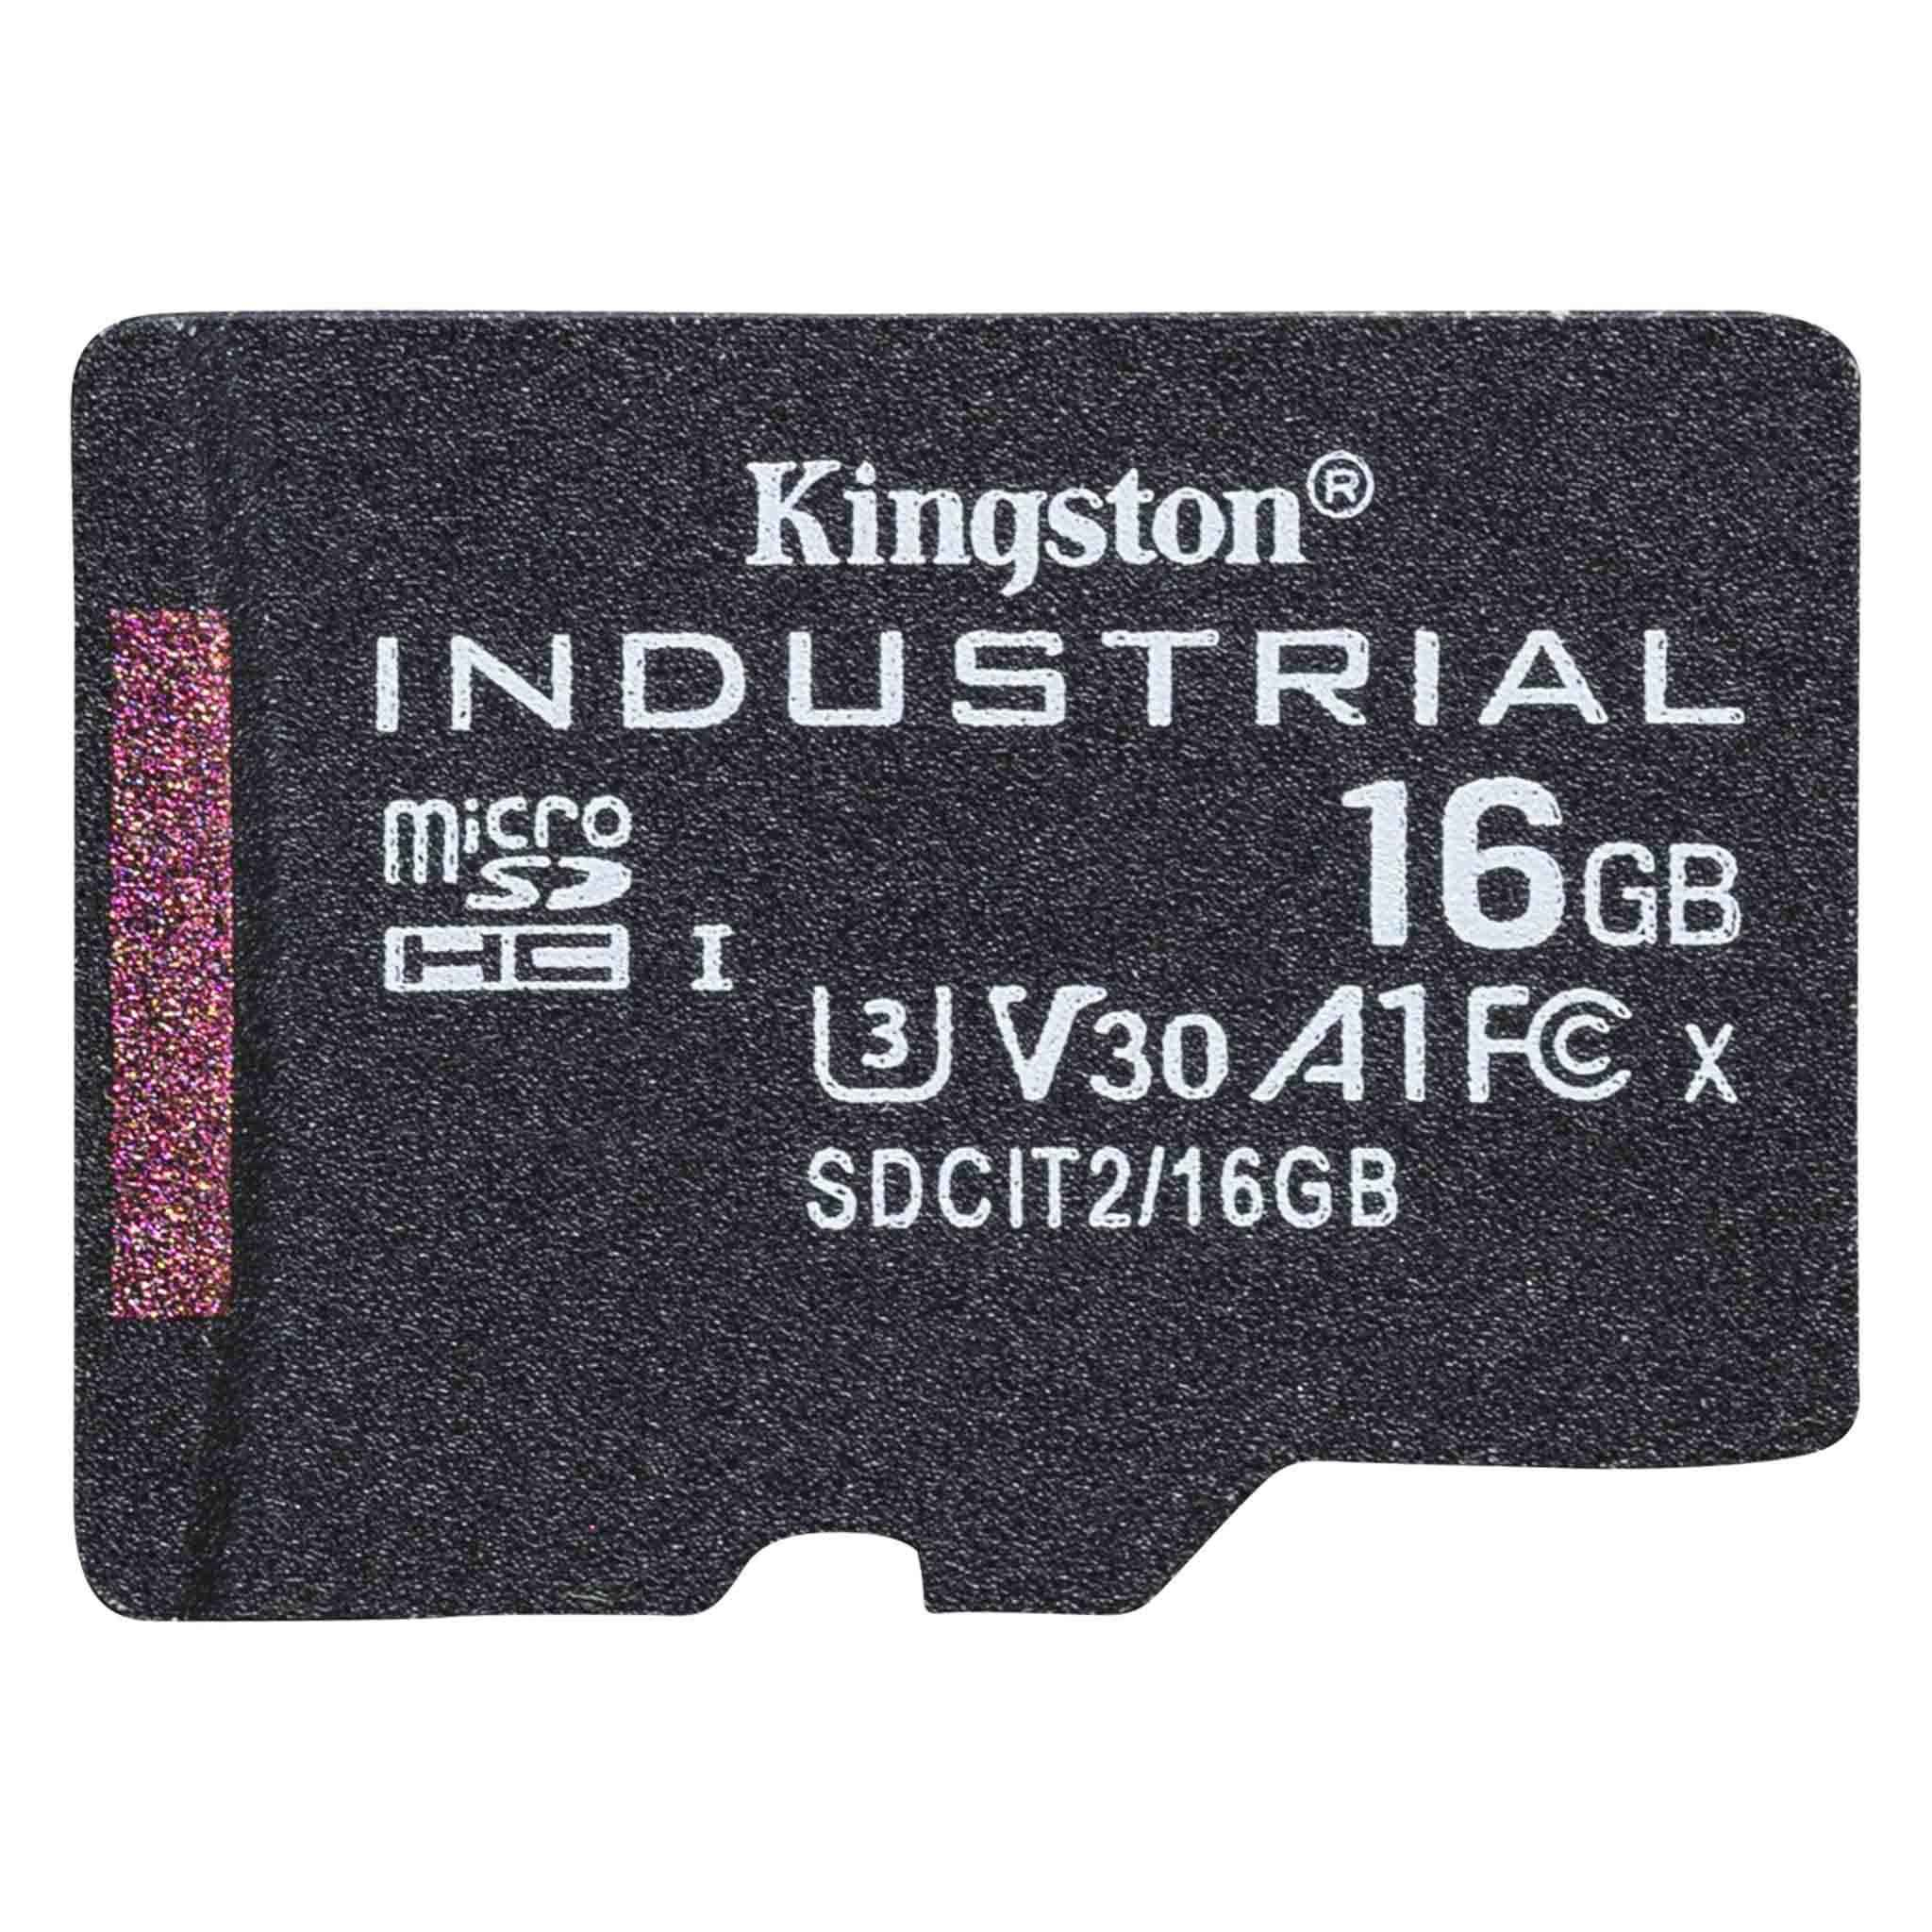 16GB microSDHC Industrial C10 A1 pSLC Card Single Pack w/o Adapter